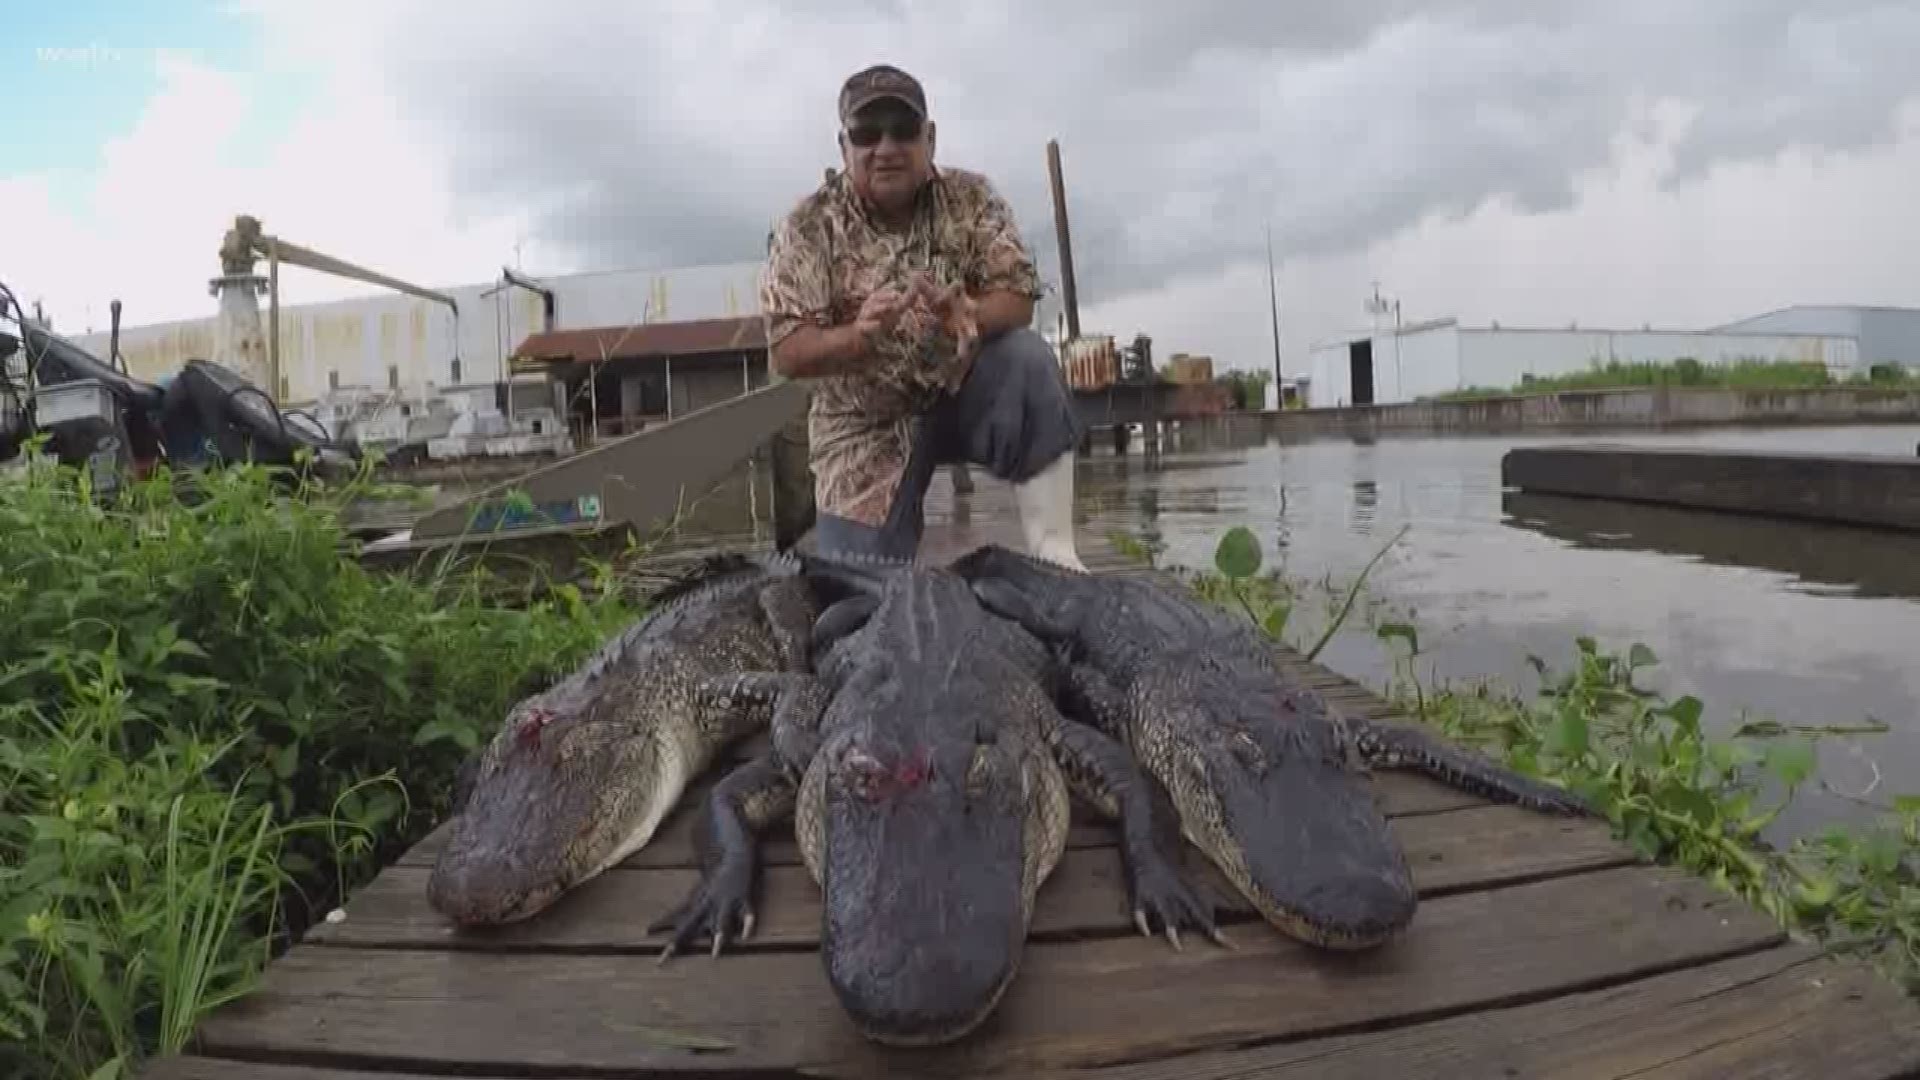 Each year, gator hunters get 30 days to fill their tags, so knowing where to go and how to hunt them is crucial.